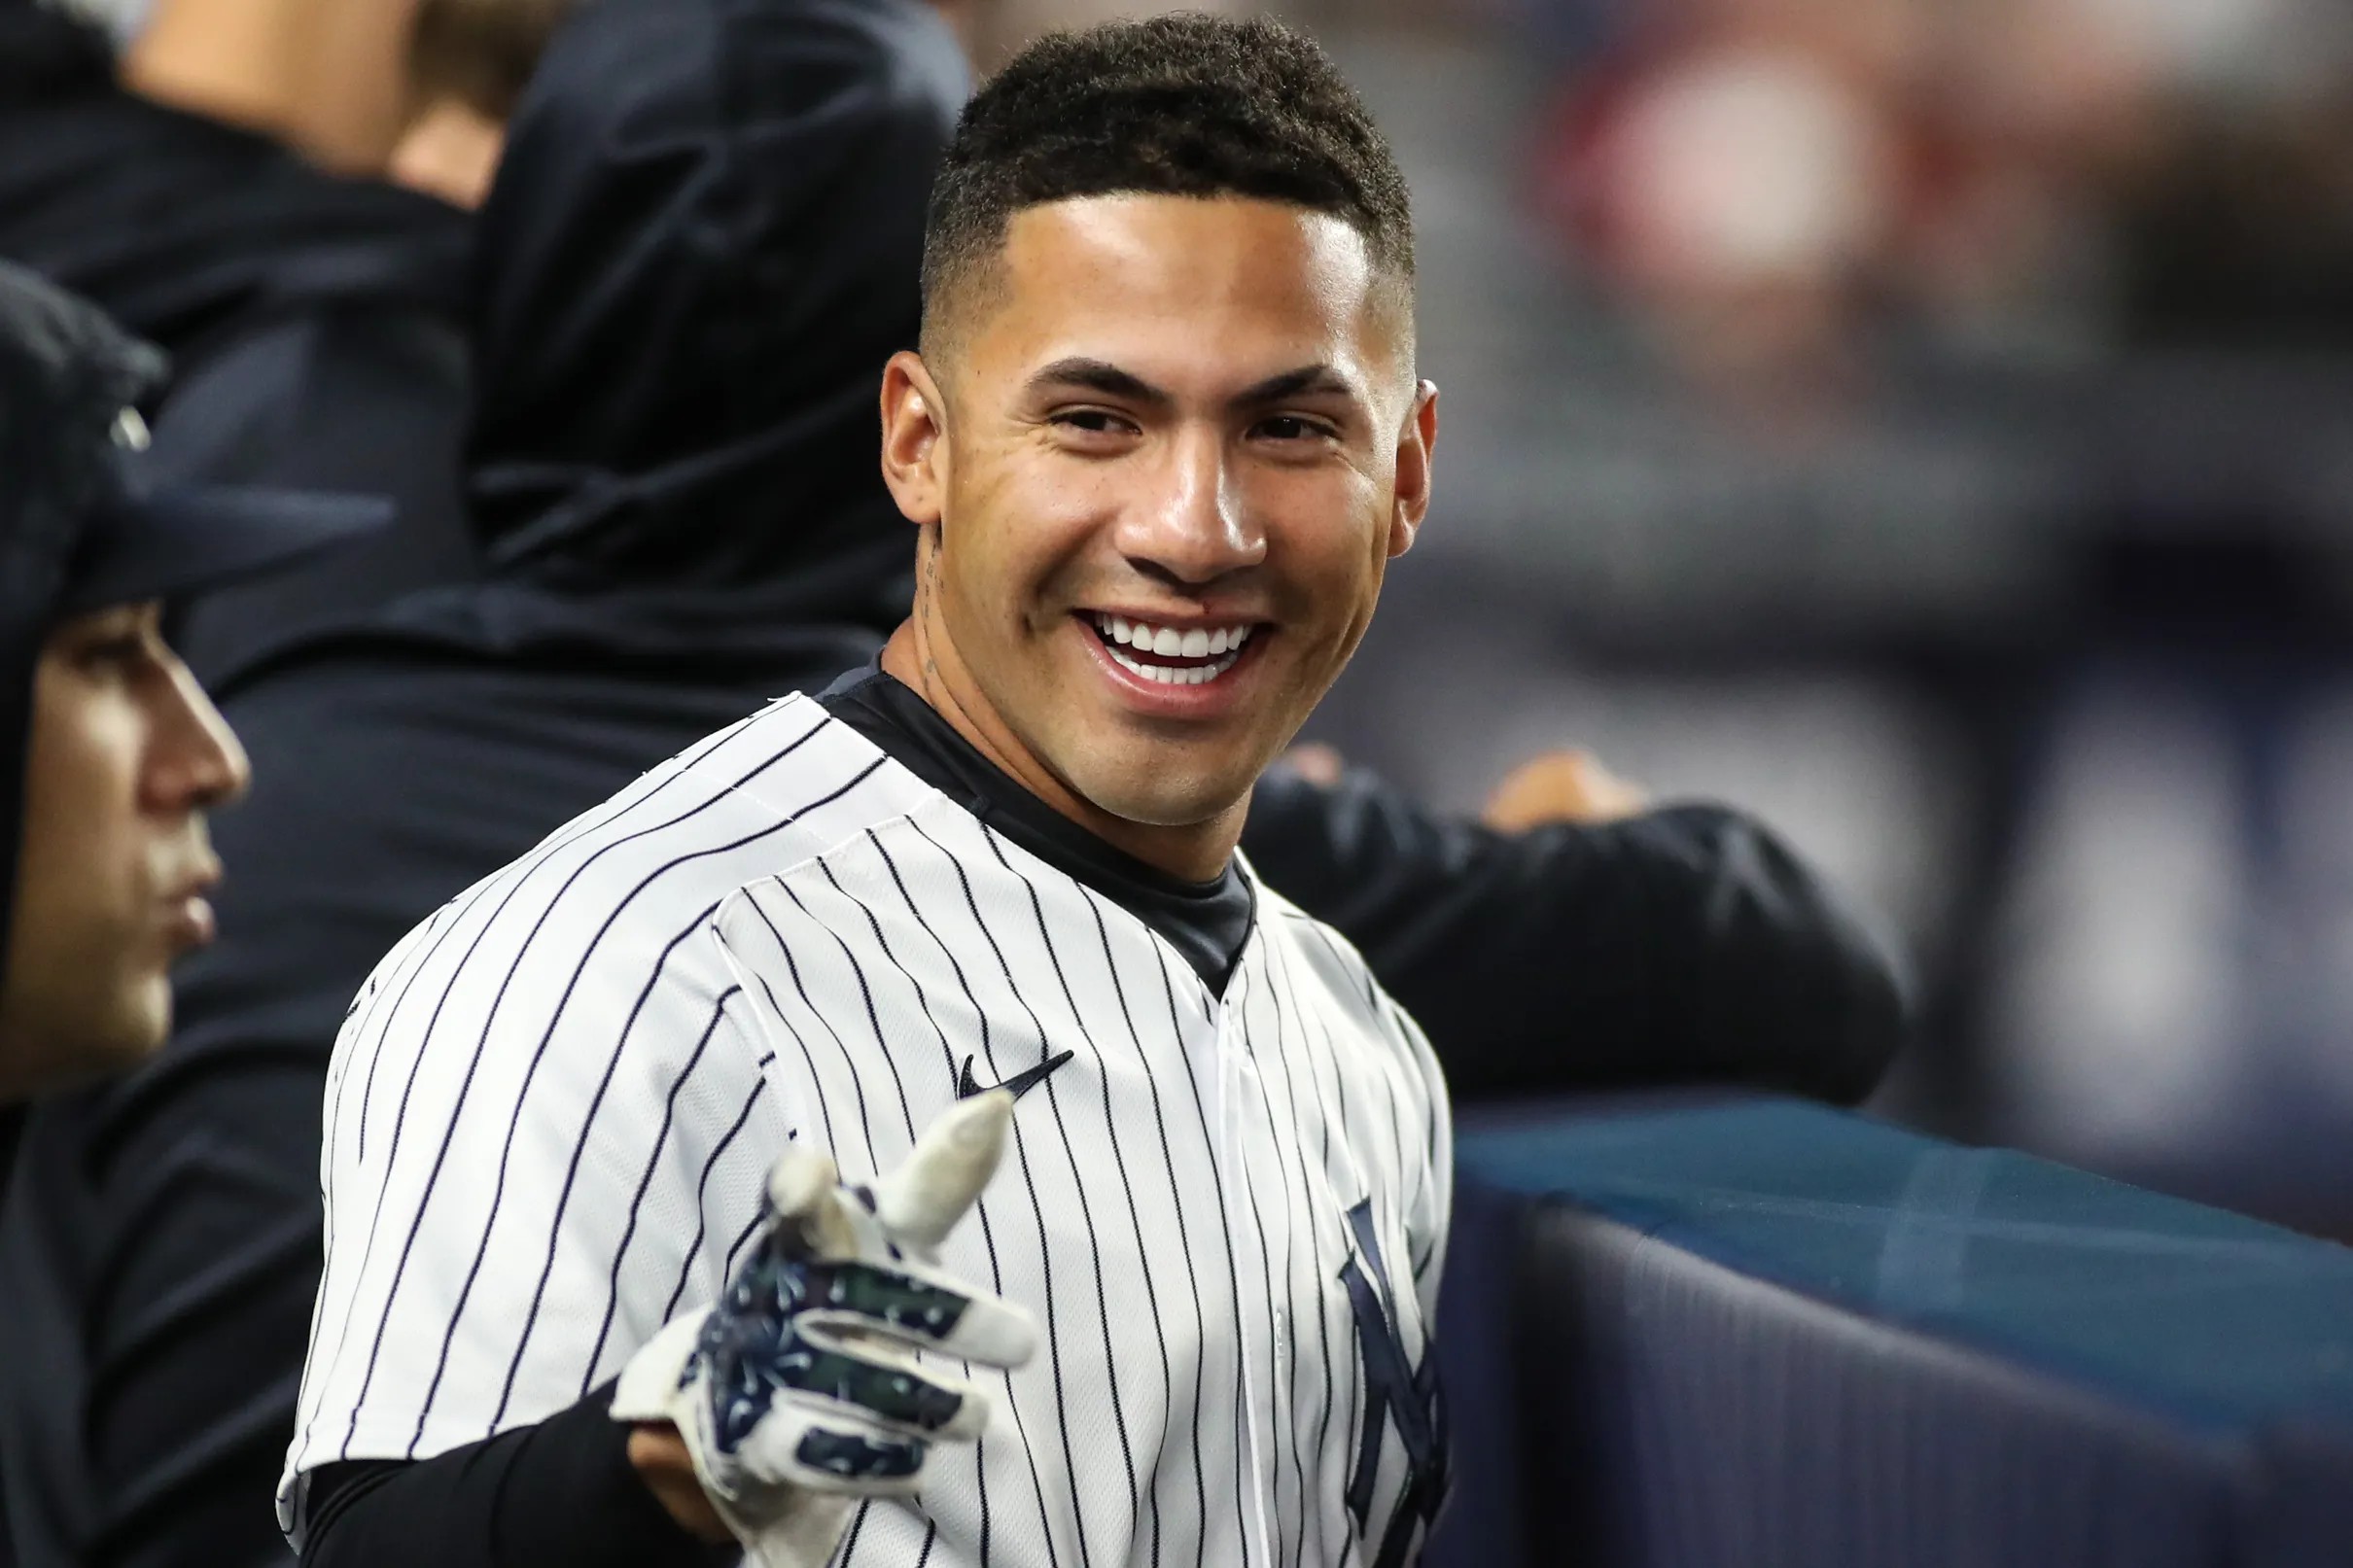 Yankees 5 Guardians 4 Gleyber Torres Salvages Another Excellent Cortes Outing